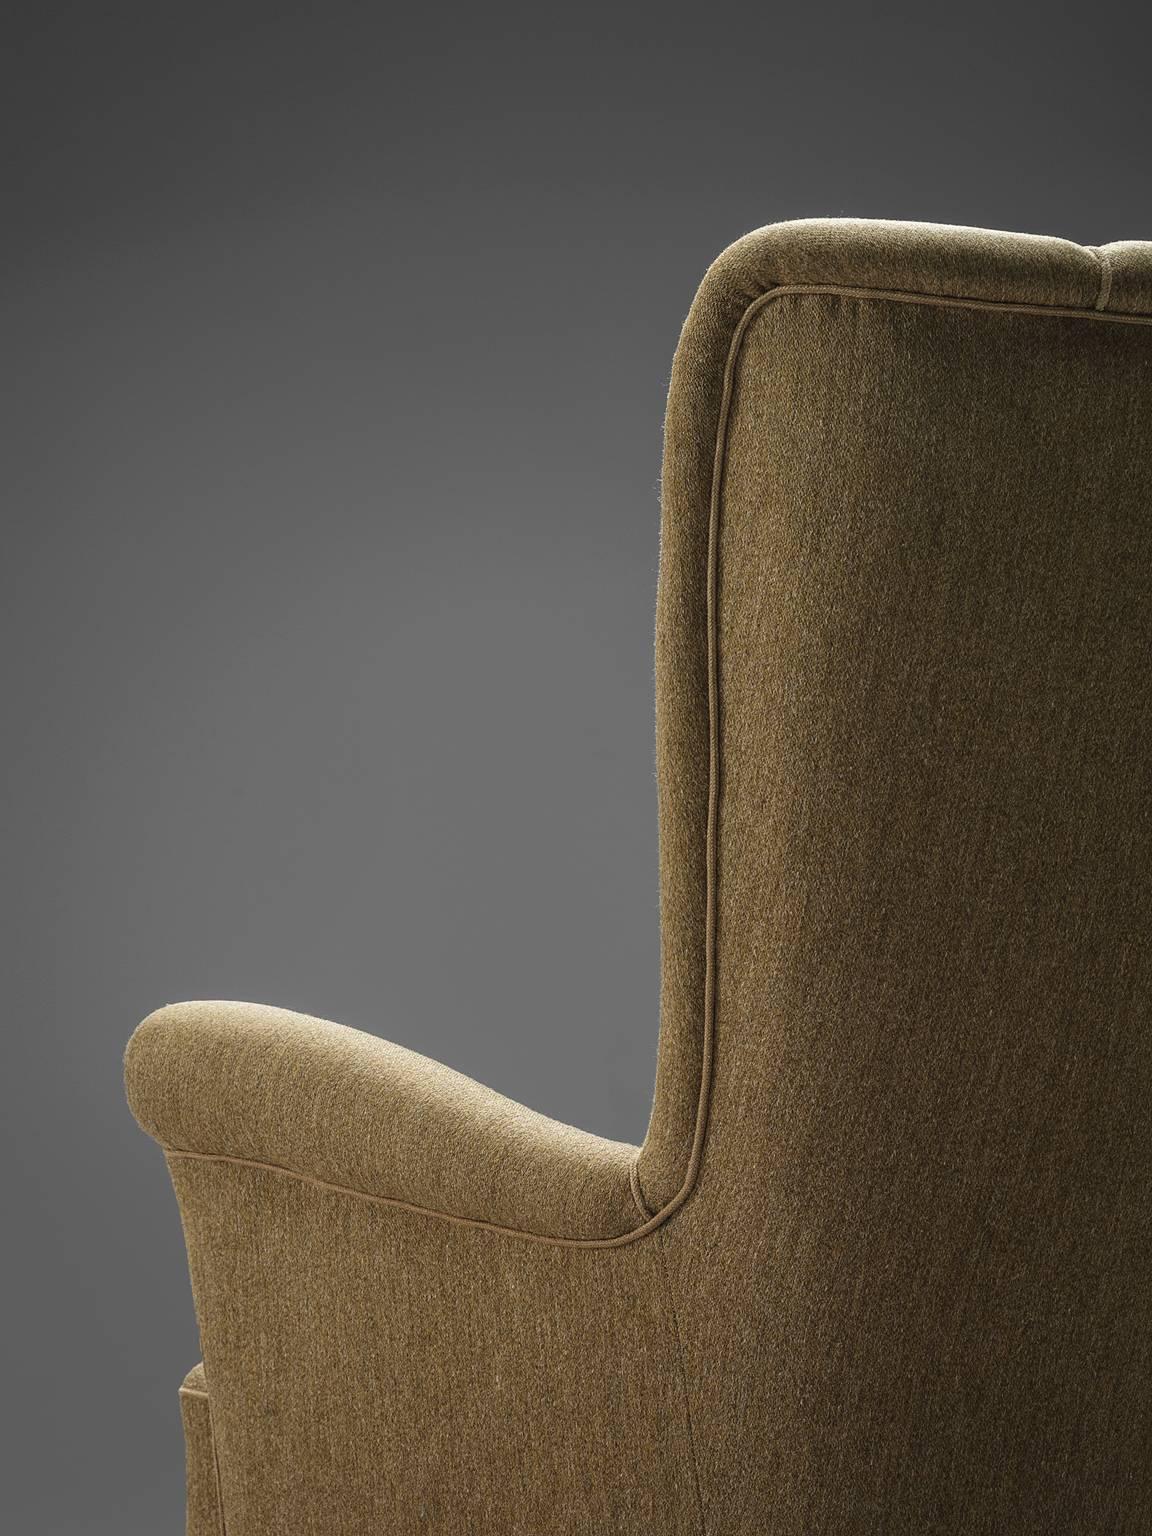 Mid-20th Century Wingback Chair in Original Woollen Upholstery